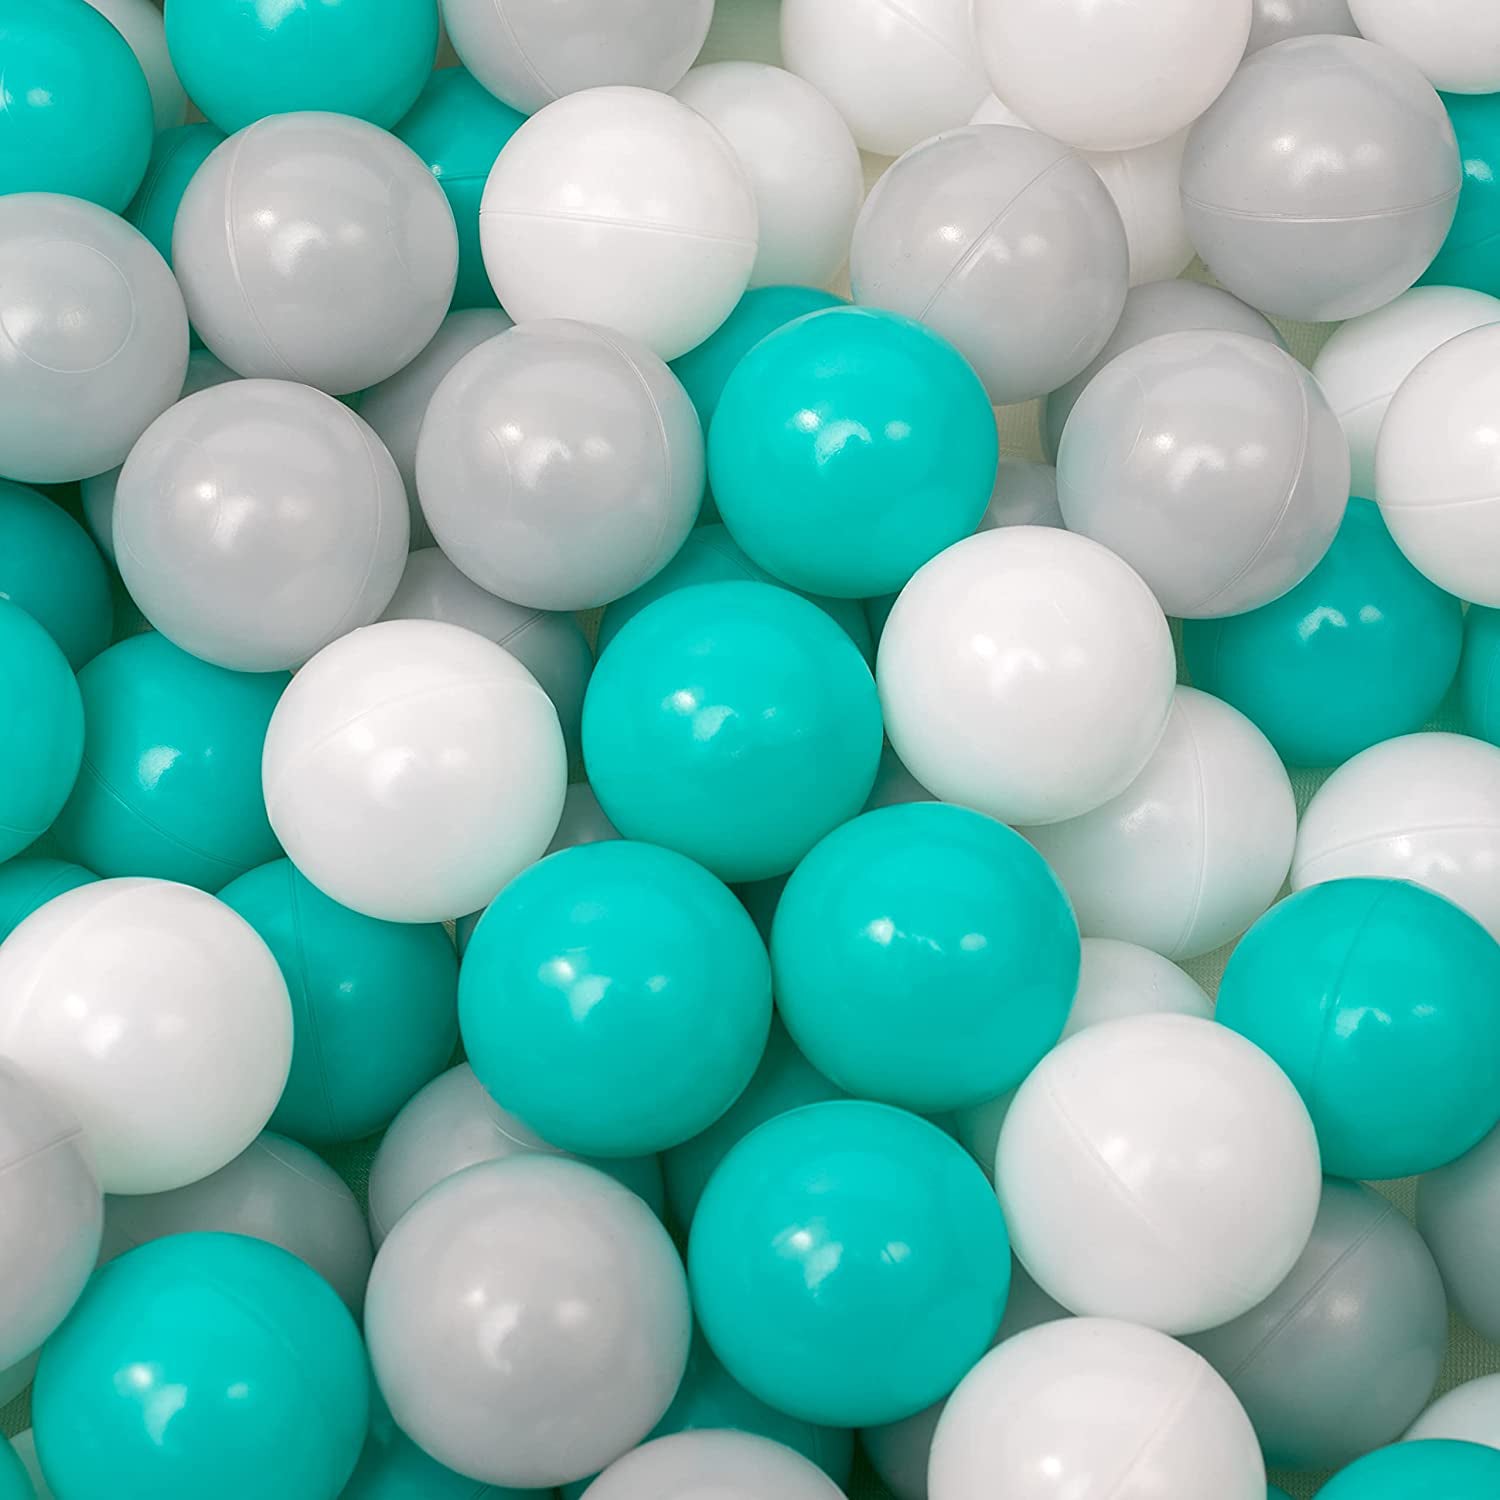 Kids' Ball Pit for Home with 200 Balls